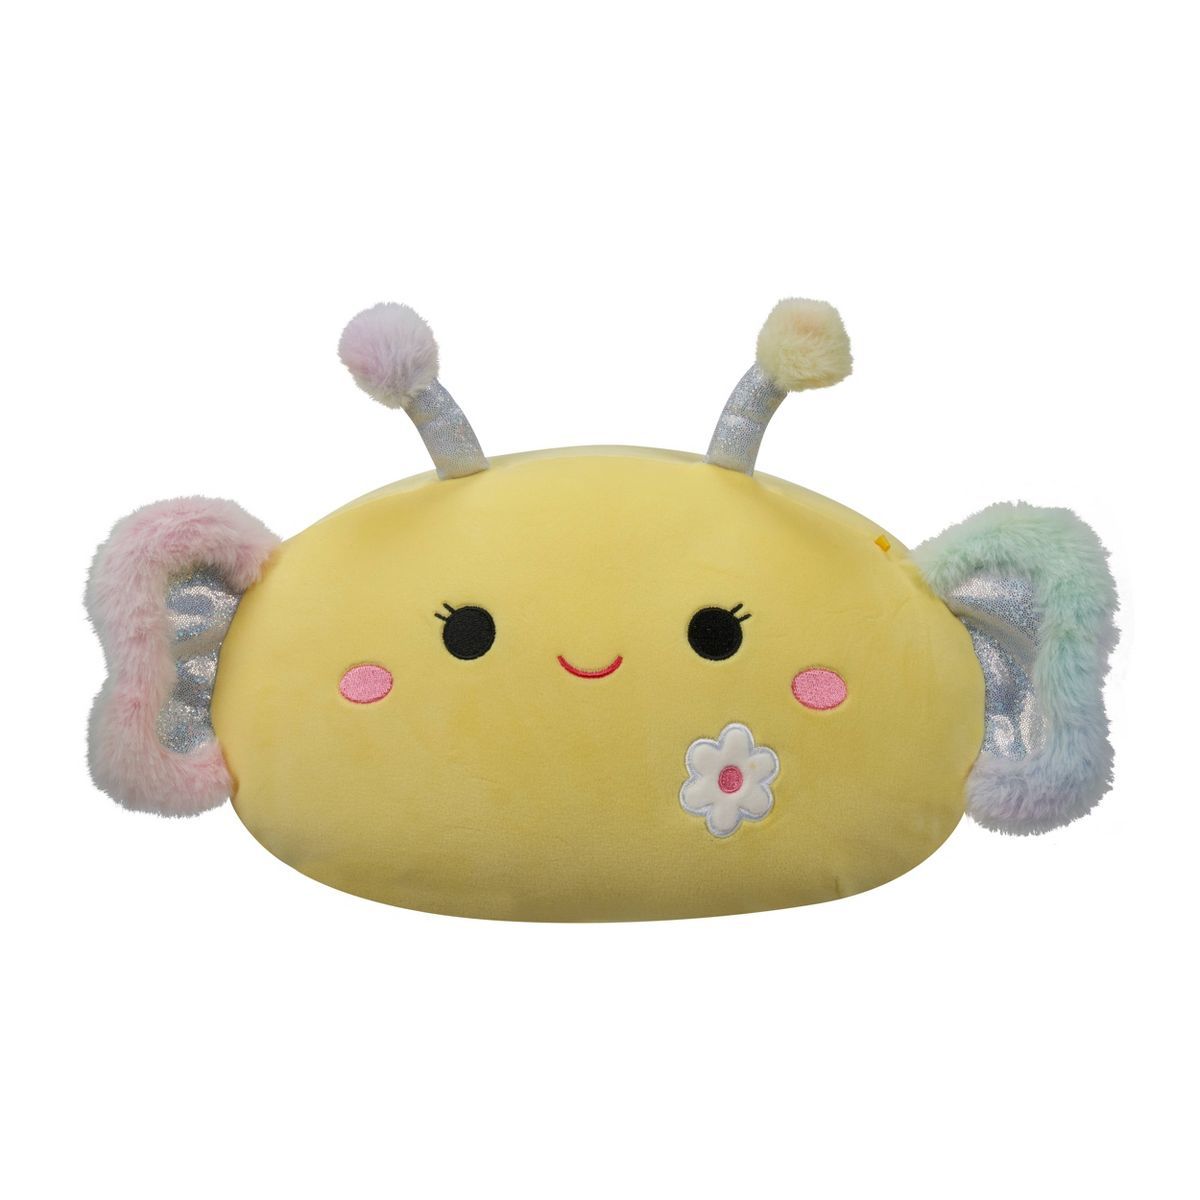 Squishmallows 12" Nixie Yellow Butterfly with Flower Embroidery Medium Stackables Plush | Target